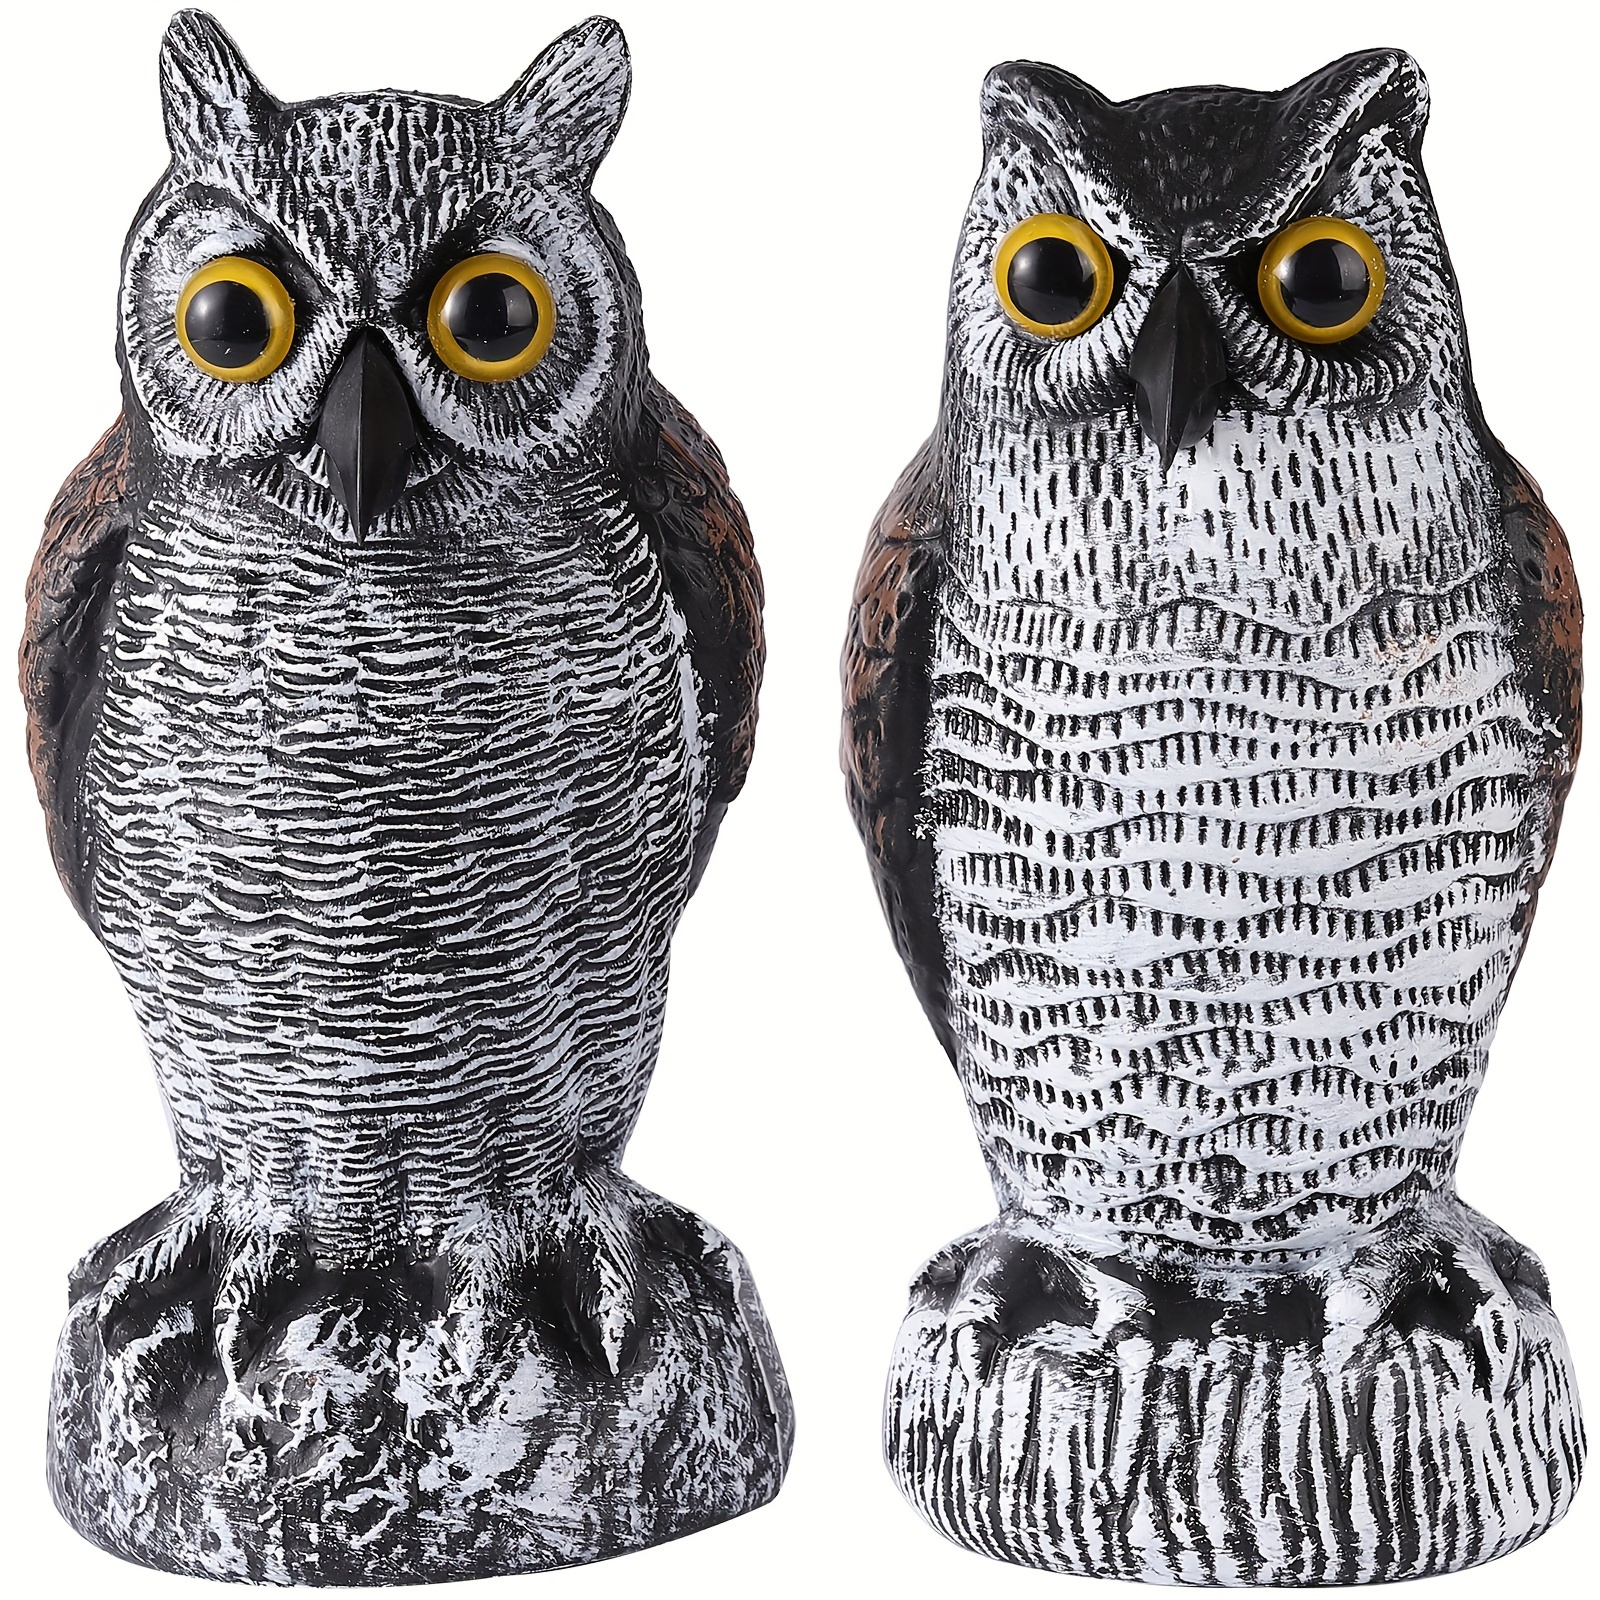 

2 Pack Fake Owl Decoys To Scare Birds Away From Gardens And Patios, Rotating Head Deterrents, Nature Enemy Plastic Owl Statues, Pest Repellent, Deterrent